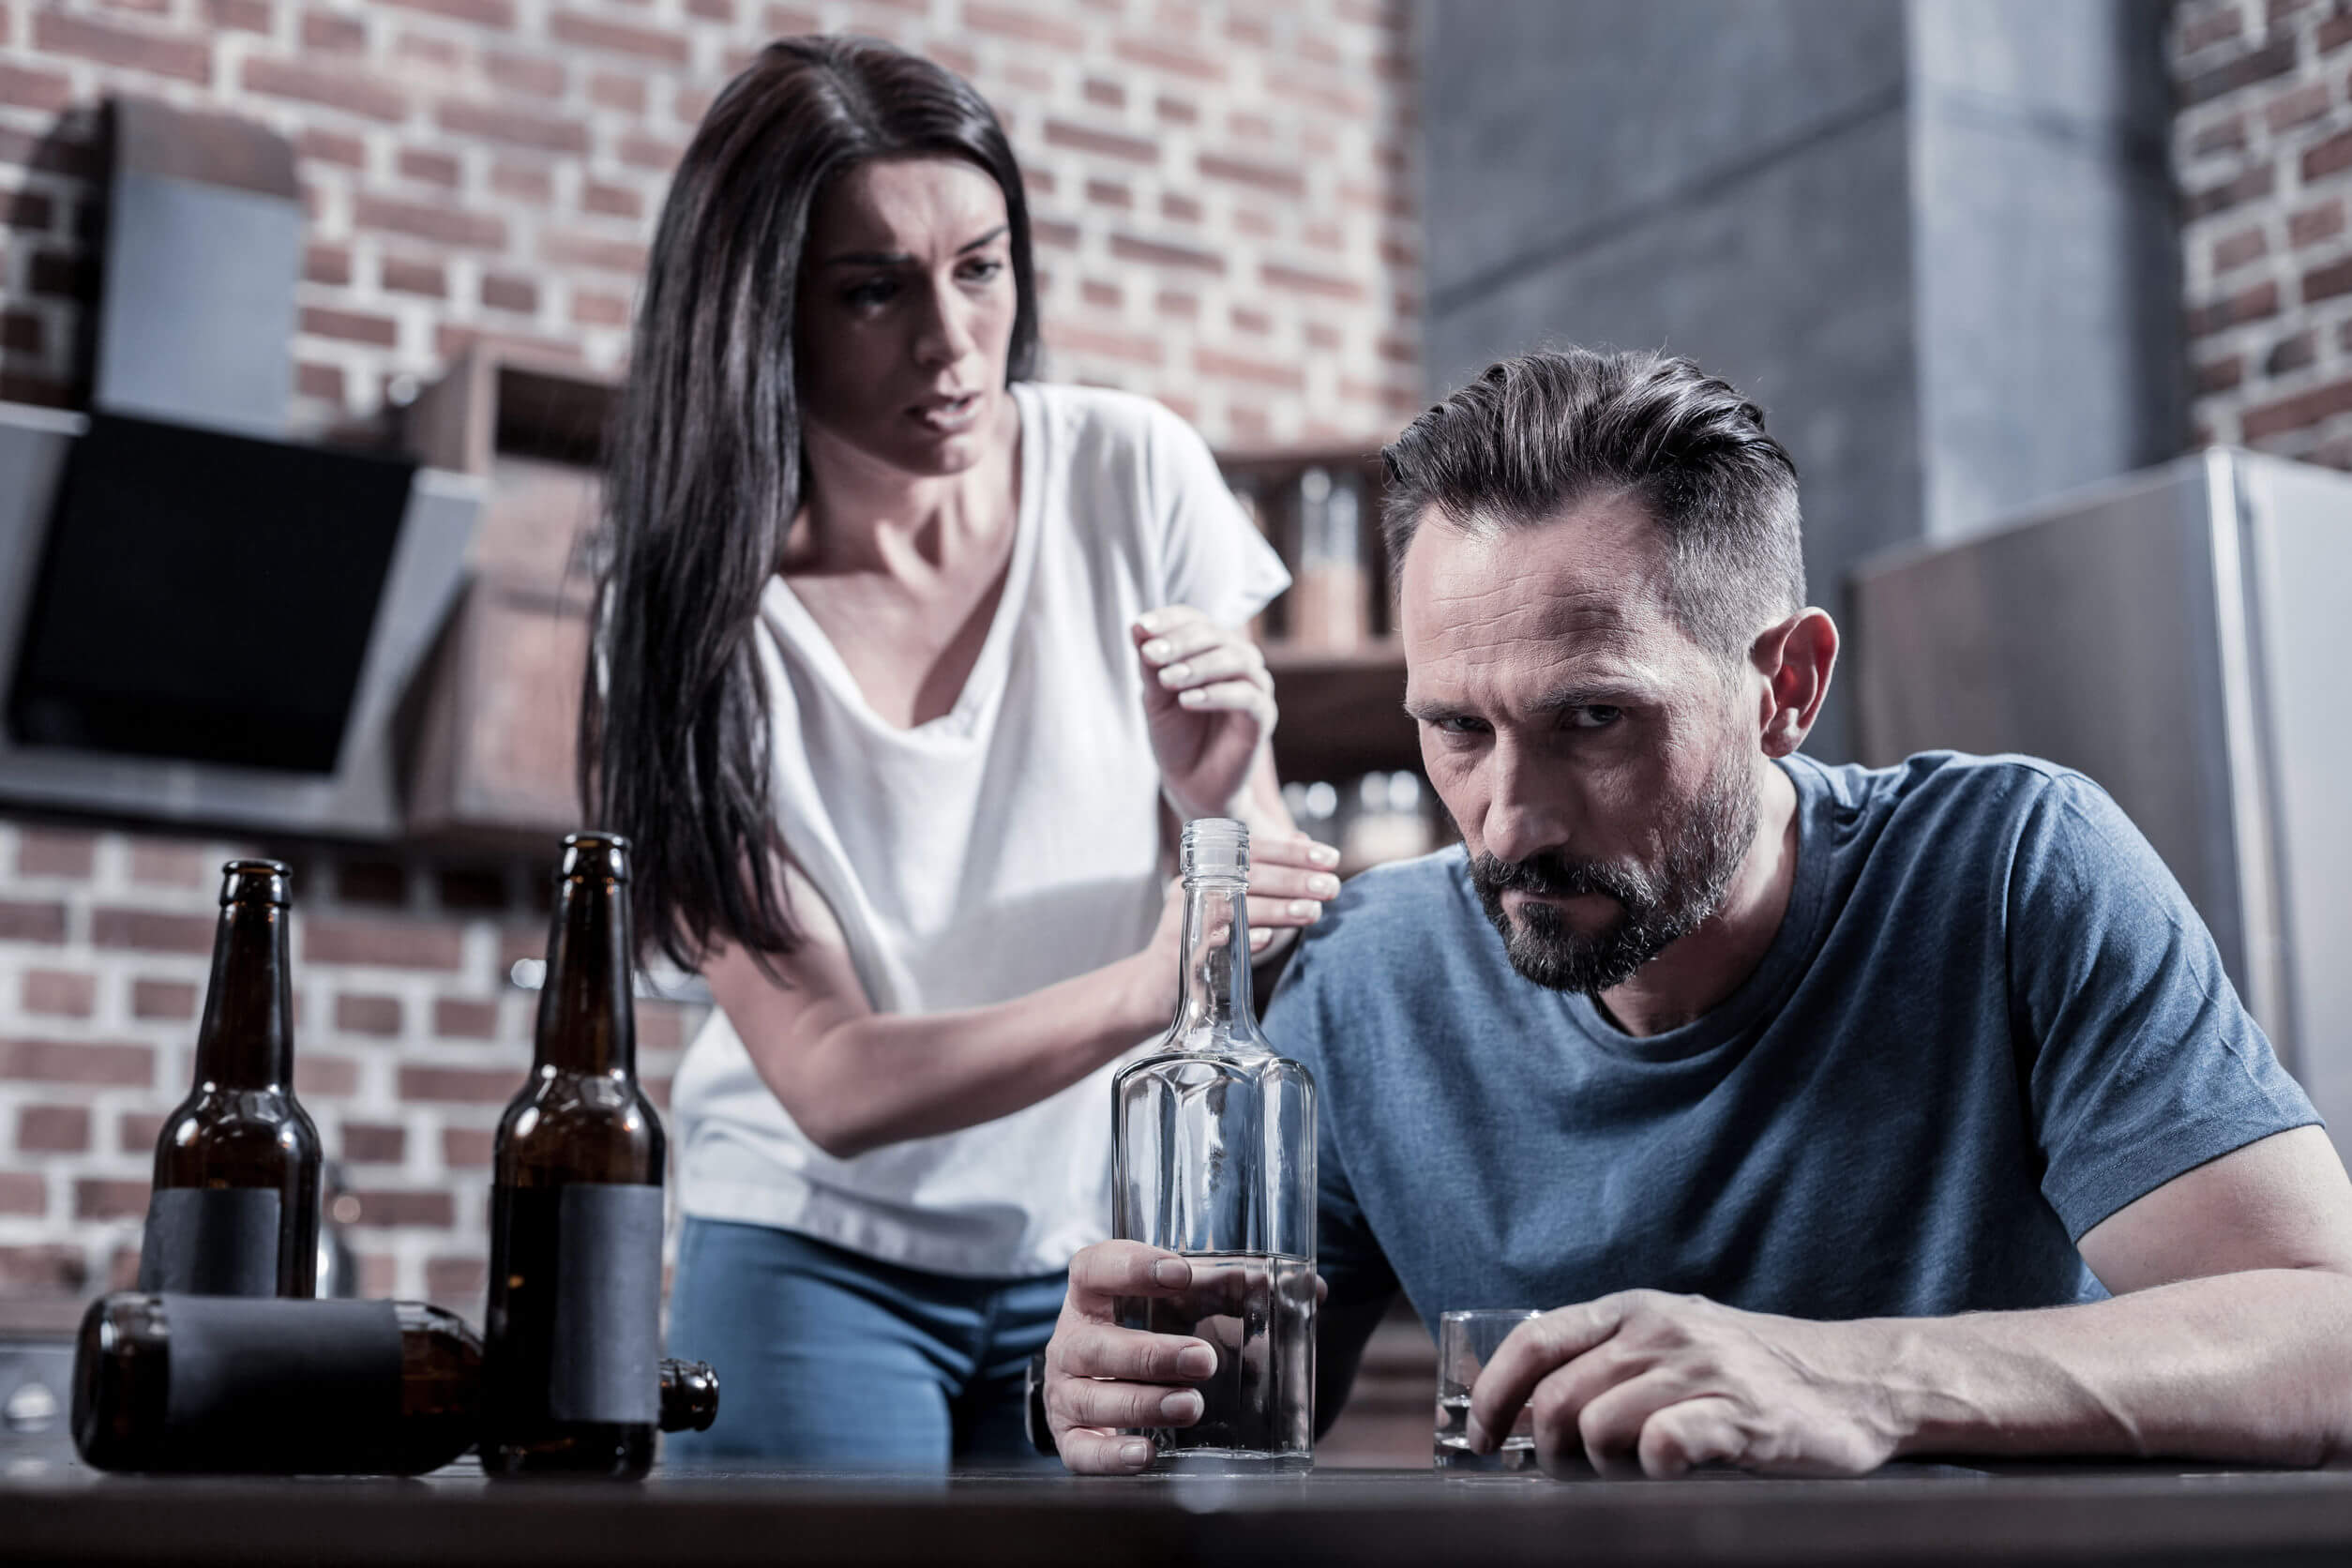 The effects of alcohol on the brain can lead to coexistence problems.